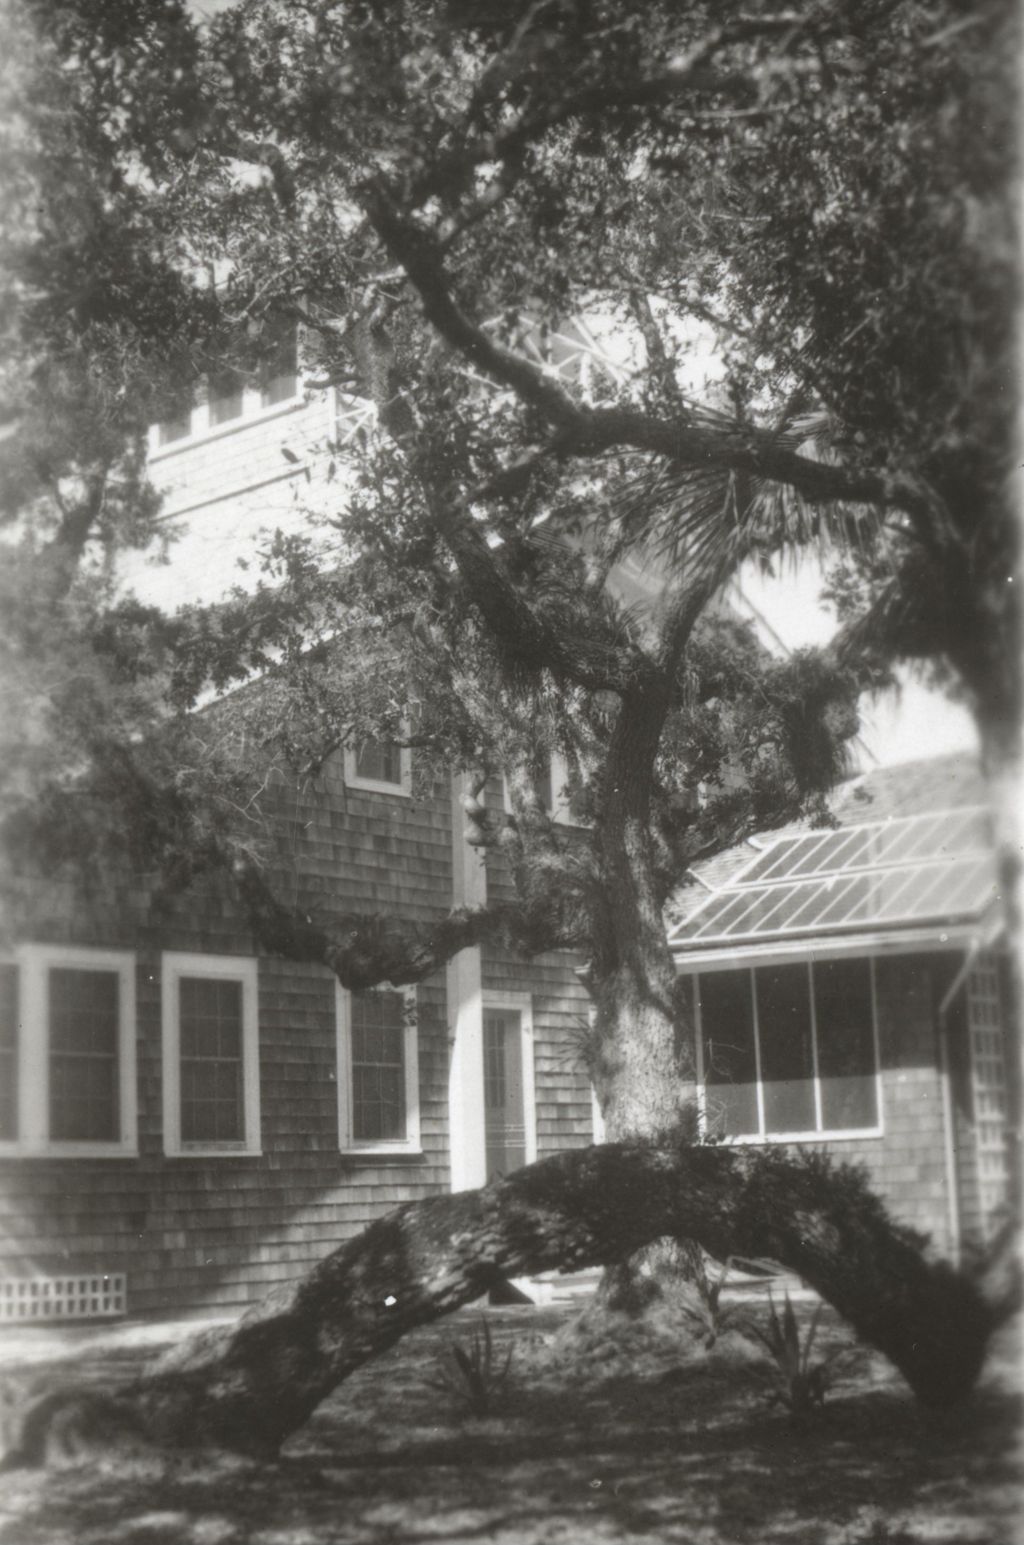 House photographed on Jane Addams' trip to Mexico